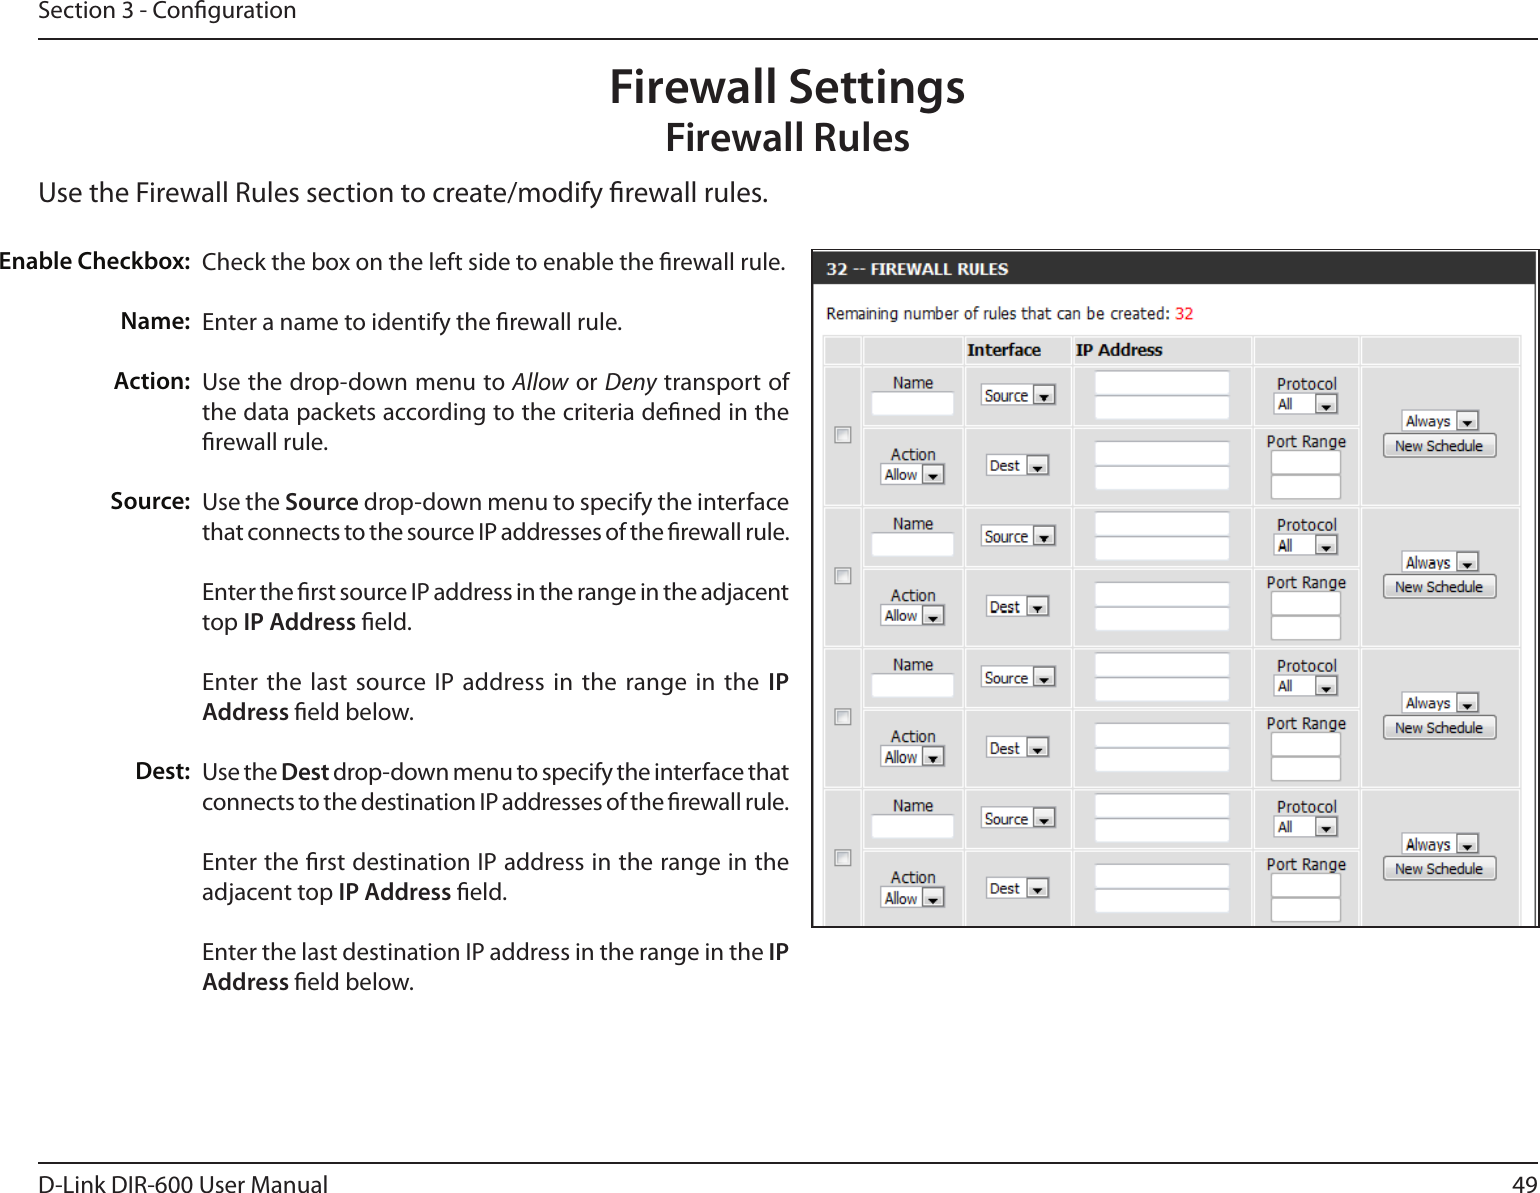 49D-Link DIR-600 User ManualSection 3 - CongurationUse the Firewall Rules section to create/modify rewall rules.Firewall SettingsFirewall RulesCheck the box on the left side to enable the rewall rule.Enter a name to identify the rewall rule.Use the drop-down menu to Allow or Deny transport of the data packets according to the criteria dened in the rewall rule.Use the Source drop-down menu to specify the interface that connects to the source IP addresses of the rewall rule. Enter the rst source IP address in the range in the adjacent top IP Address eld.Enter the last  source IP address in the  range in the  IP Address eld below.Use the Dest drop-down menu to specify the interface that connects to the destination IP addresses of the rewall rule. Enter the rst destination IP address in the range in the adjacent top IP Address eld.Enter the last destination IP address in the range in the IP Address eld below.Enable Checkbox:Name:Action:Source:Dest: